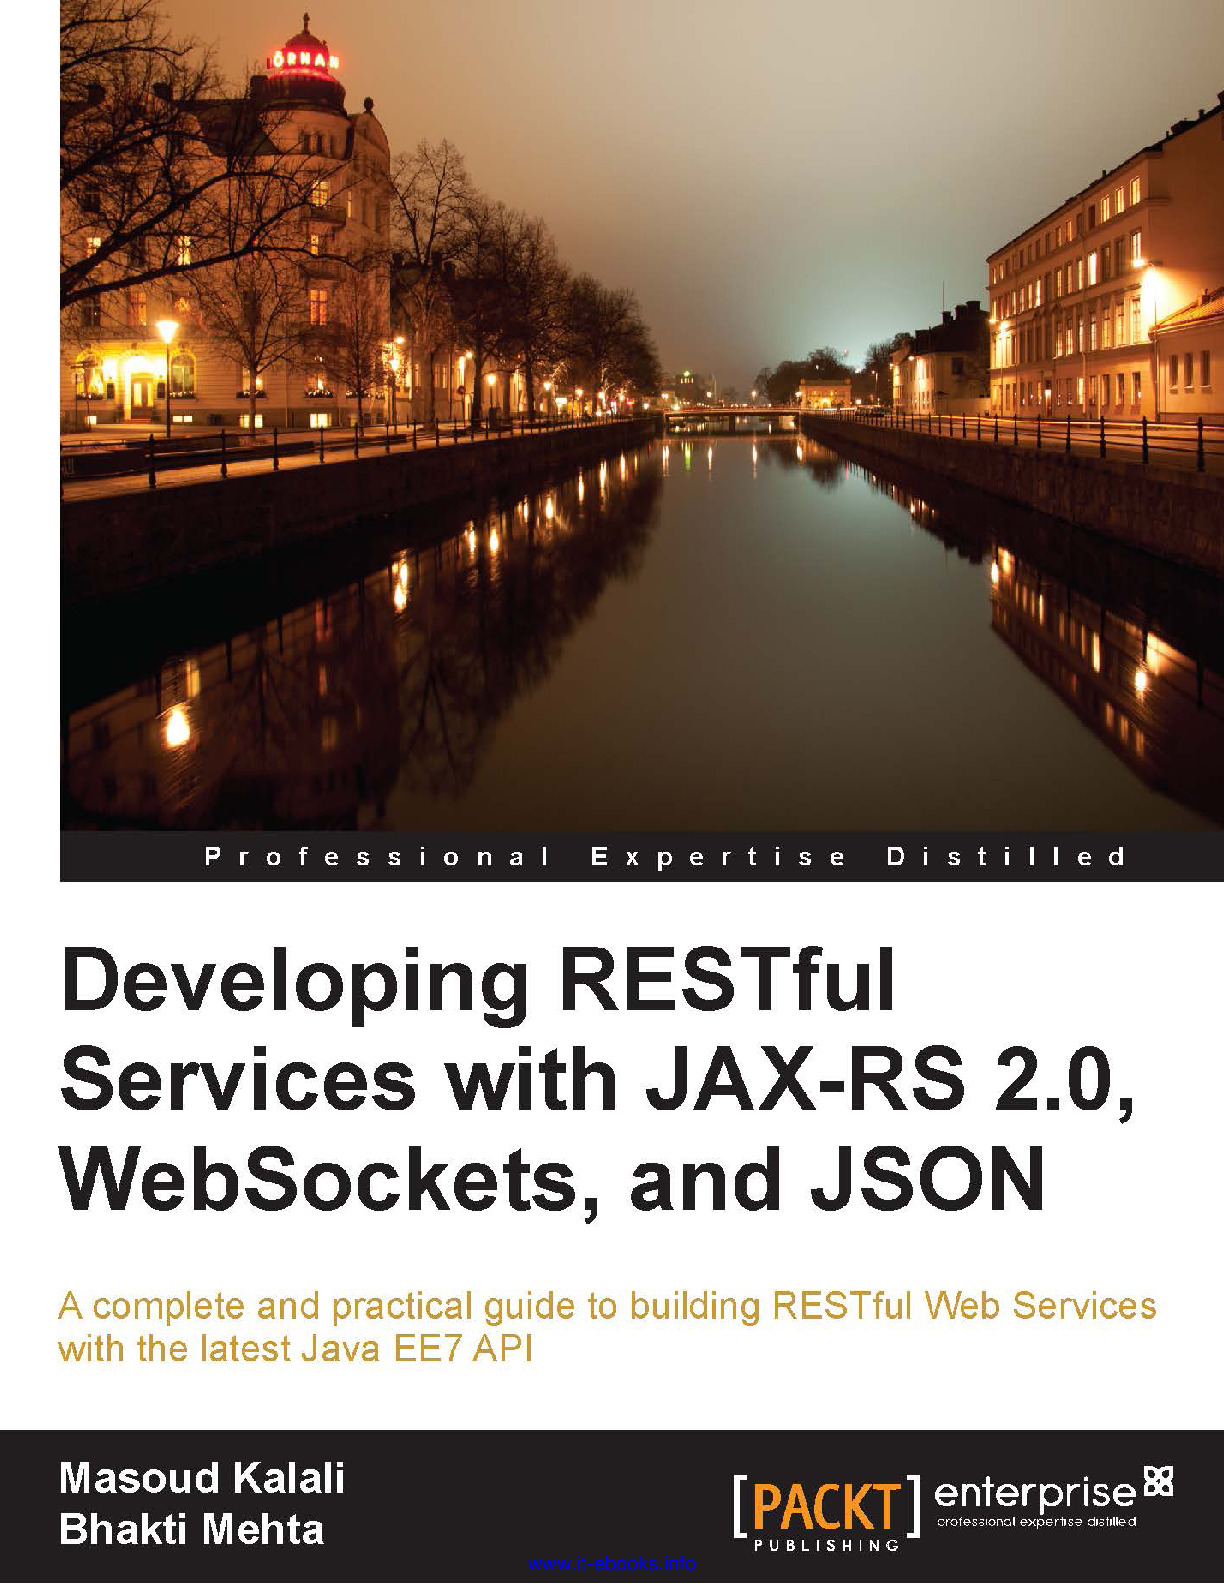 [JAVA][Developing RESTful Services with JAX-RS 2.0, WebSockets, and JSON]